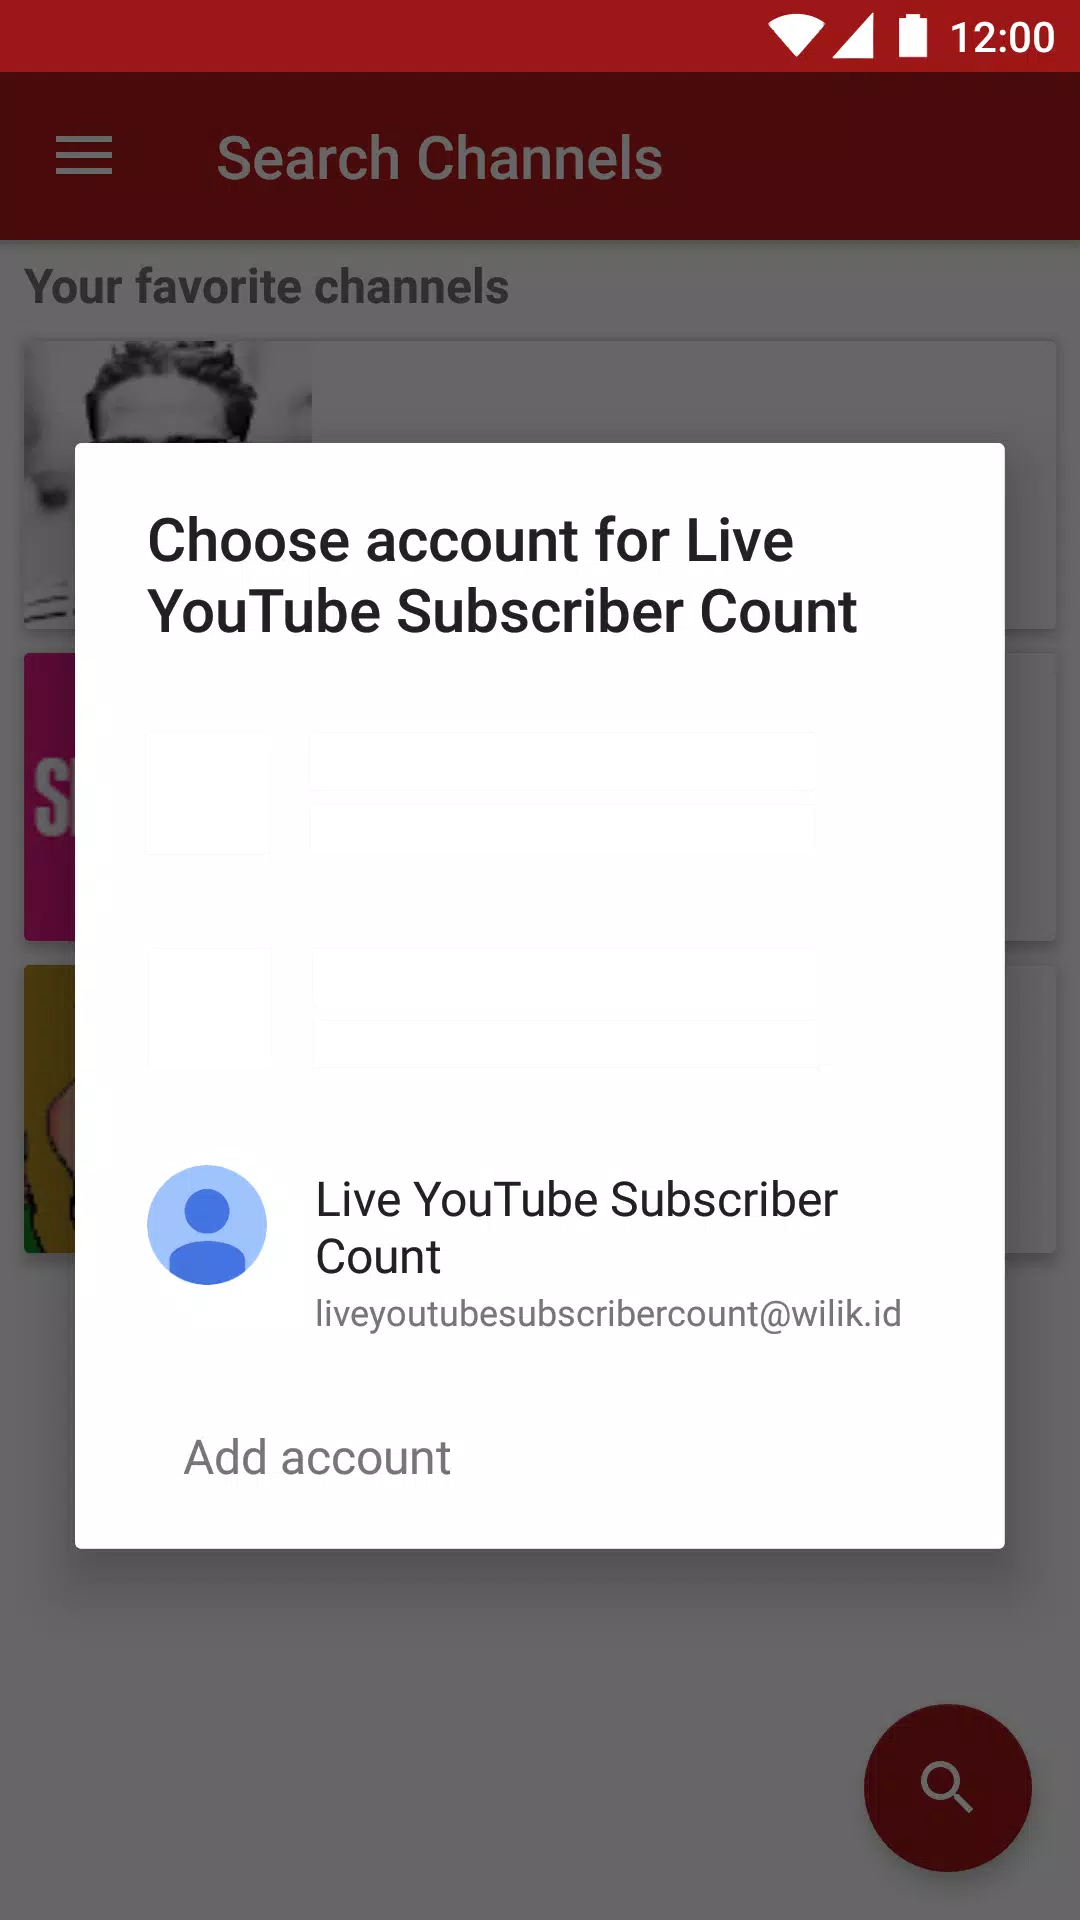 Live Sub Count Apk Download for Android- Latest version 1-  com.funappsnow.livesubcountandroid